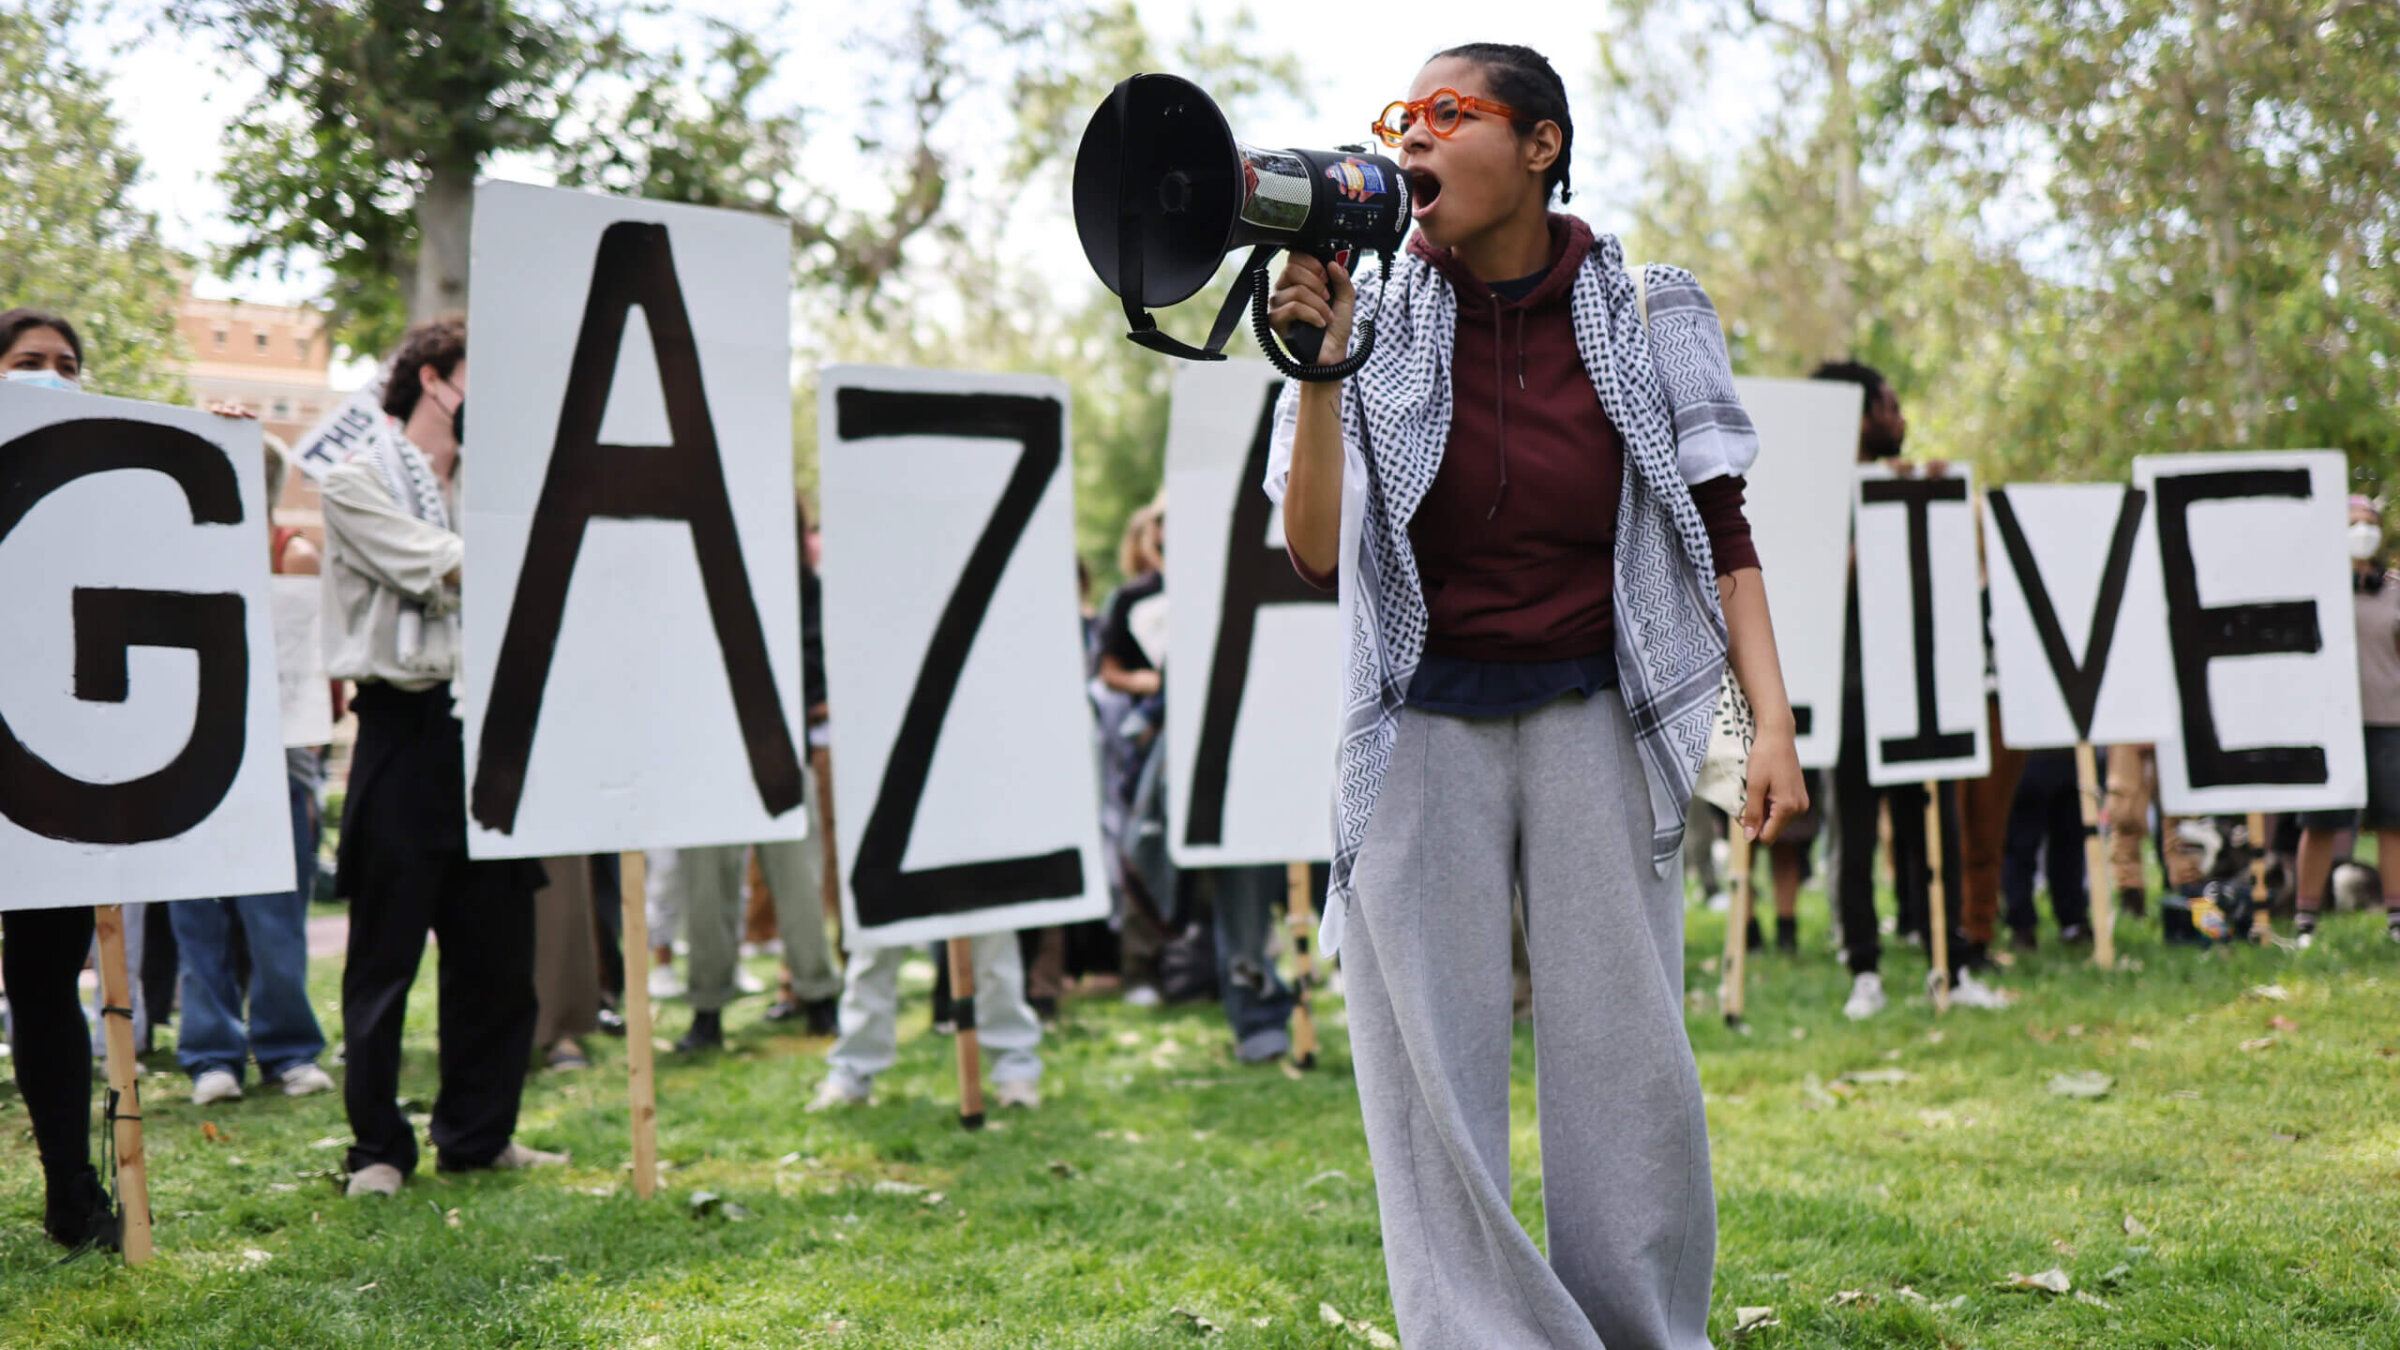 Pro-Palestinian demonstrators rally at an encampment in support of Gaza at the University of Southern California on April 24 in Los Angeles. 